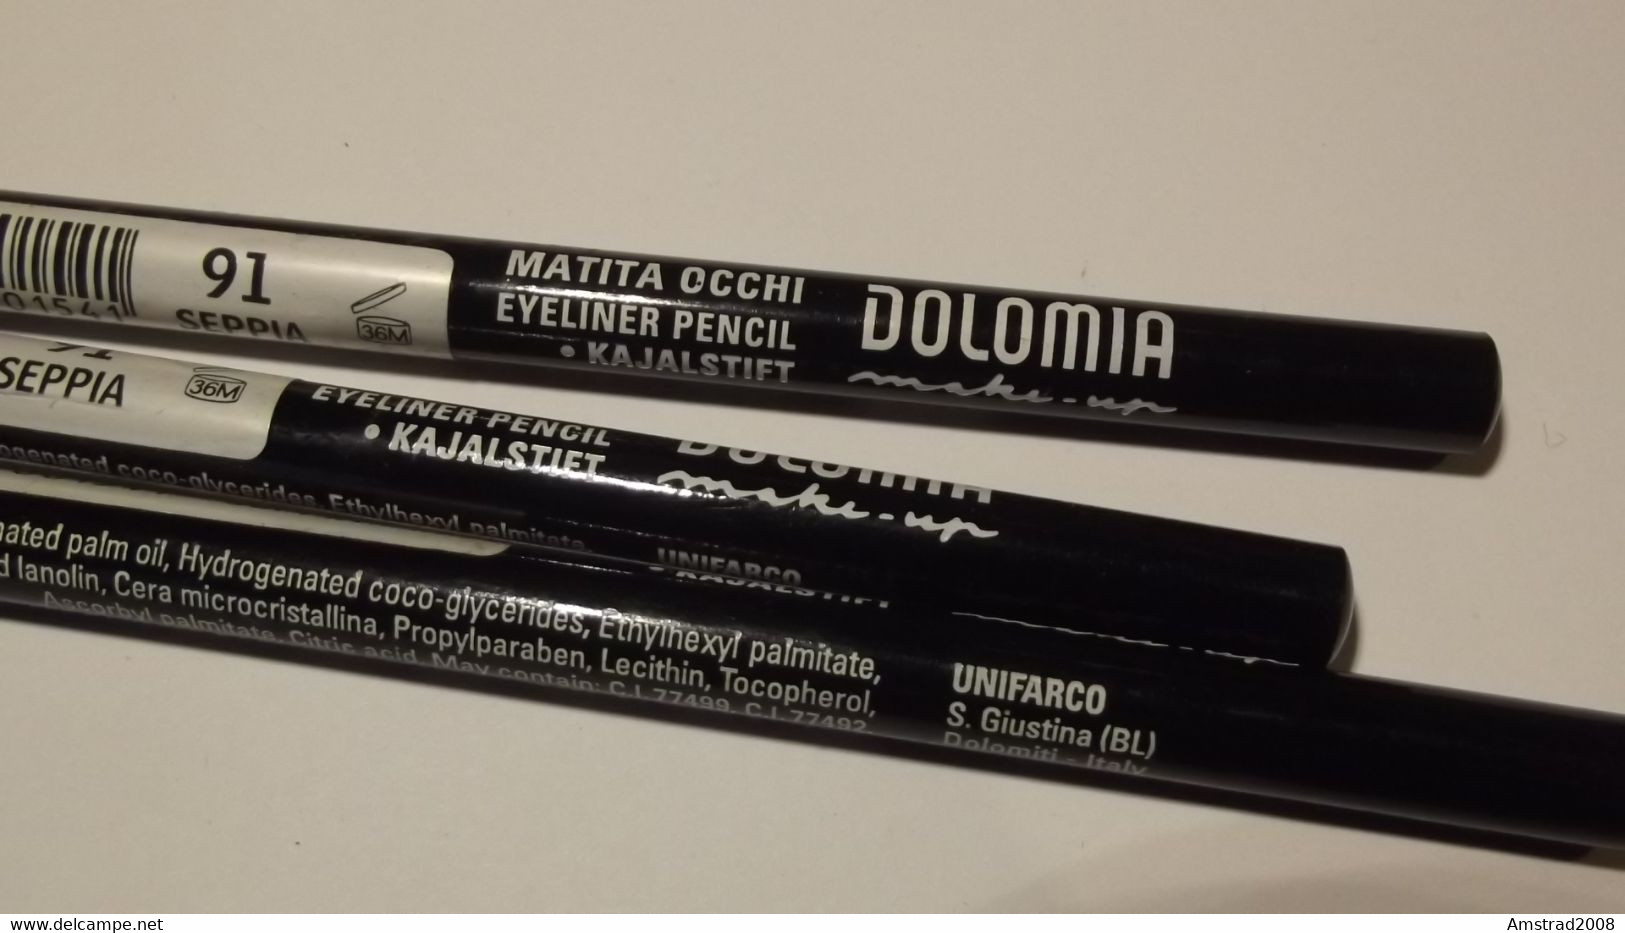 DOLOMIA MATITA OCCHI EYELINER PENCIL KAJALSTIFT COLORE 91 SEPPIA MADE IN ITALY - Beauty Products